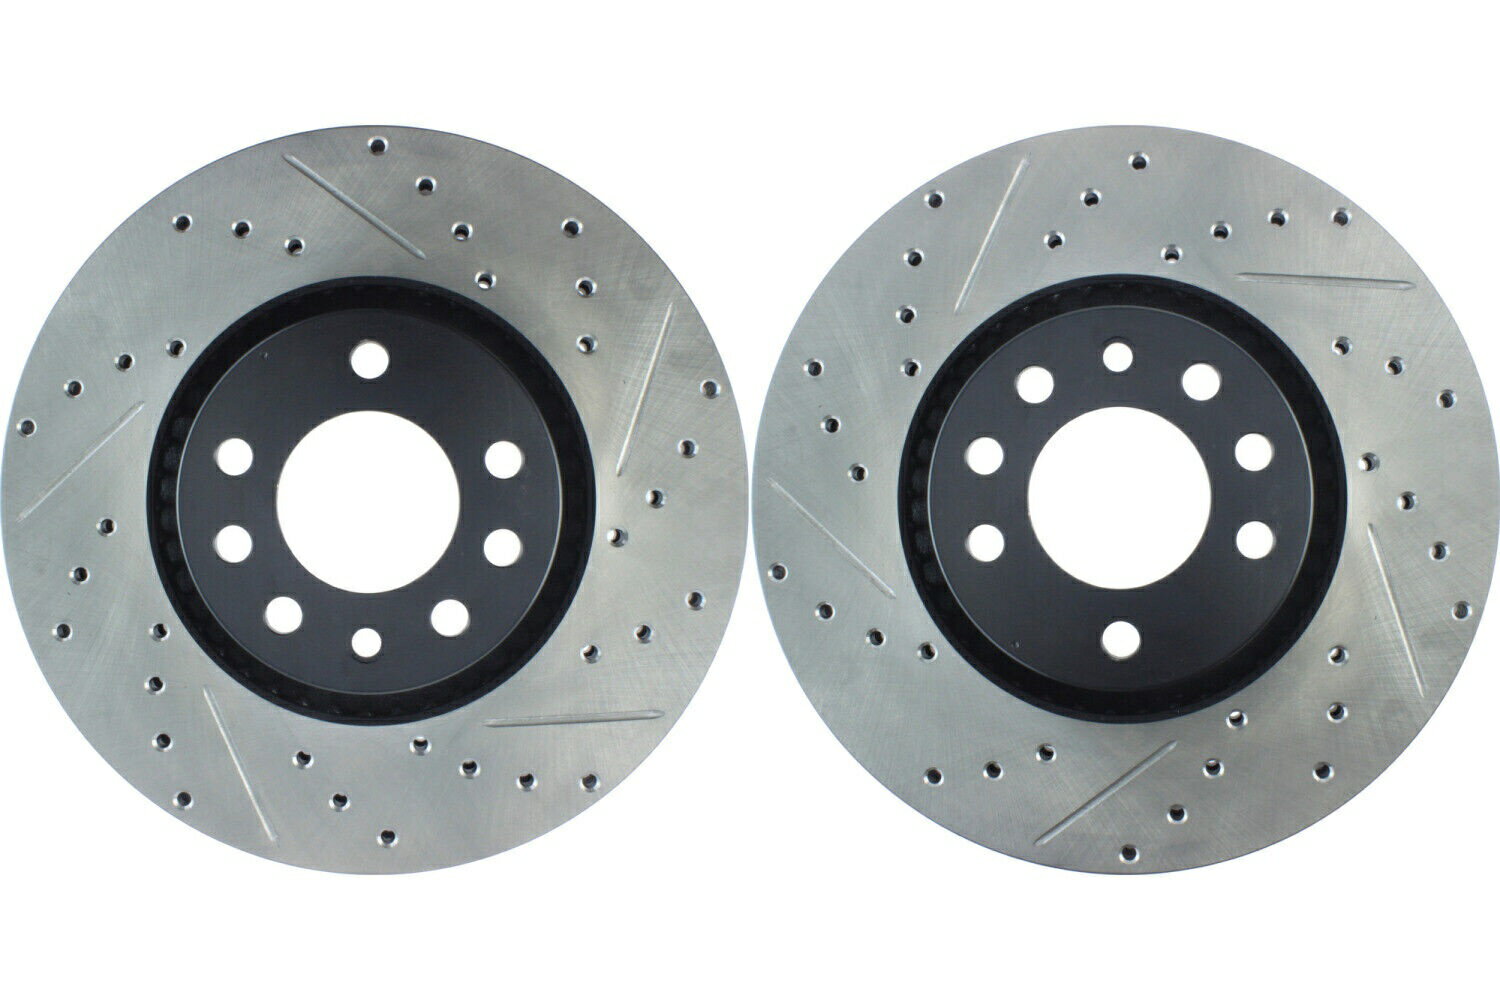 brake disc rotor sppブラック340mm掘削掘削さたスロット付き2010-16ヒュン Front PAIR Stoptech Disc Brake Rotor for 1999-2002 Saab 9-3 (46690)